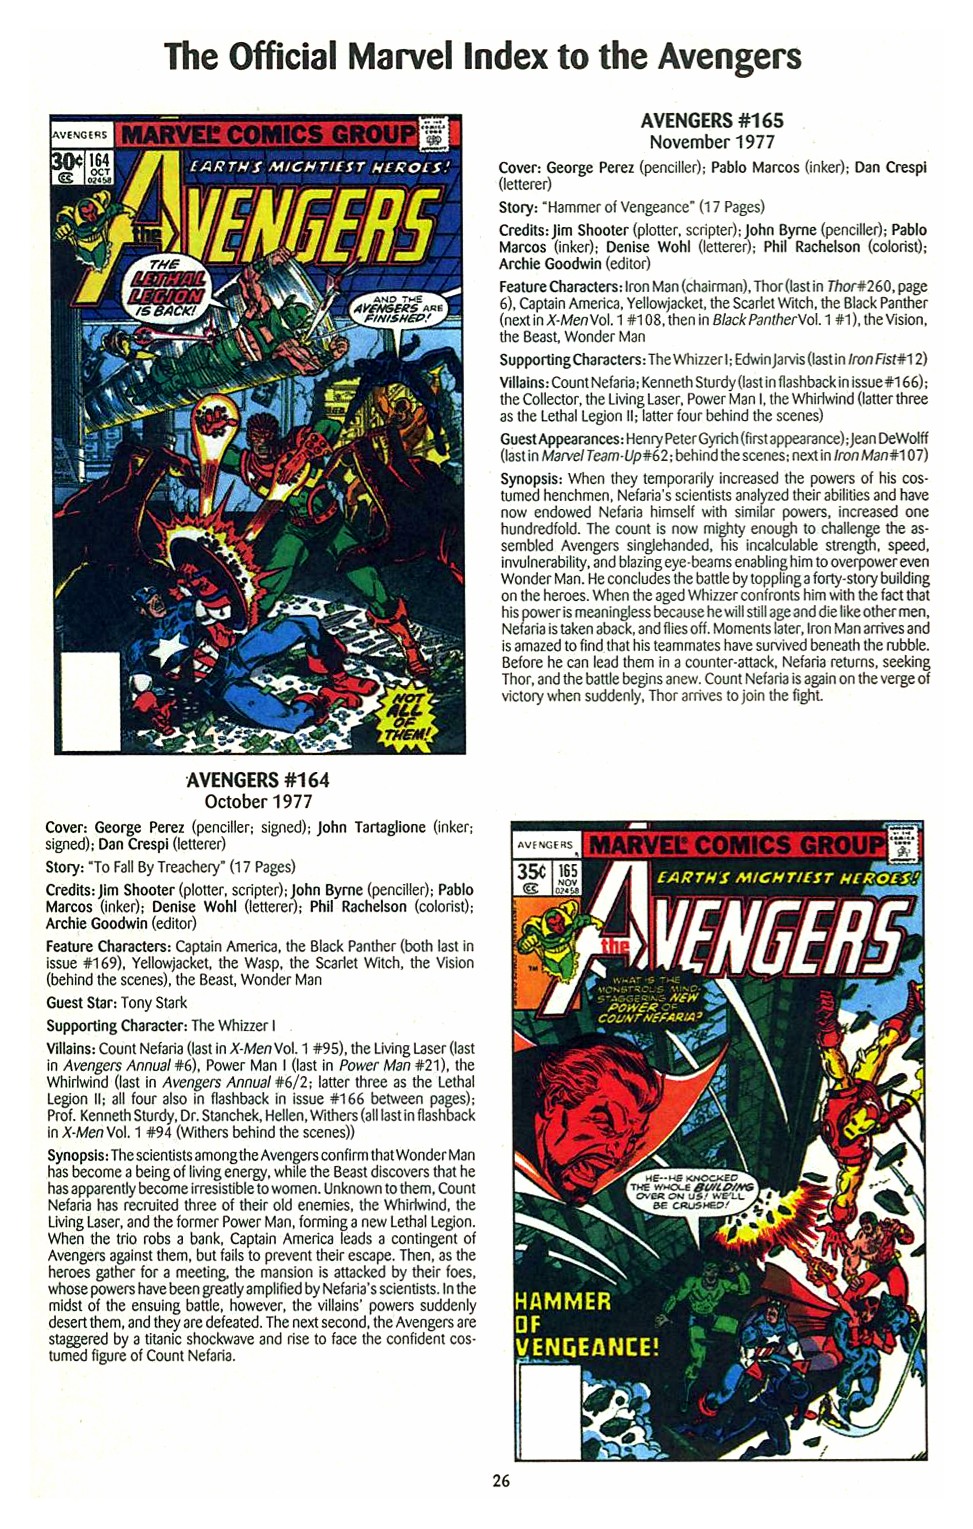 Read online The Official Marvel Index to the Avengers comic -  Issue #3 - 28